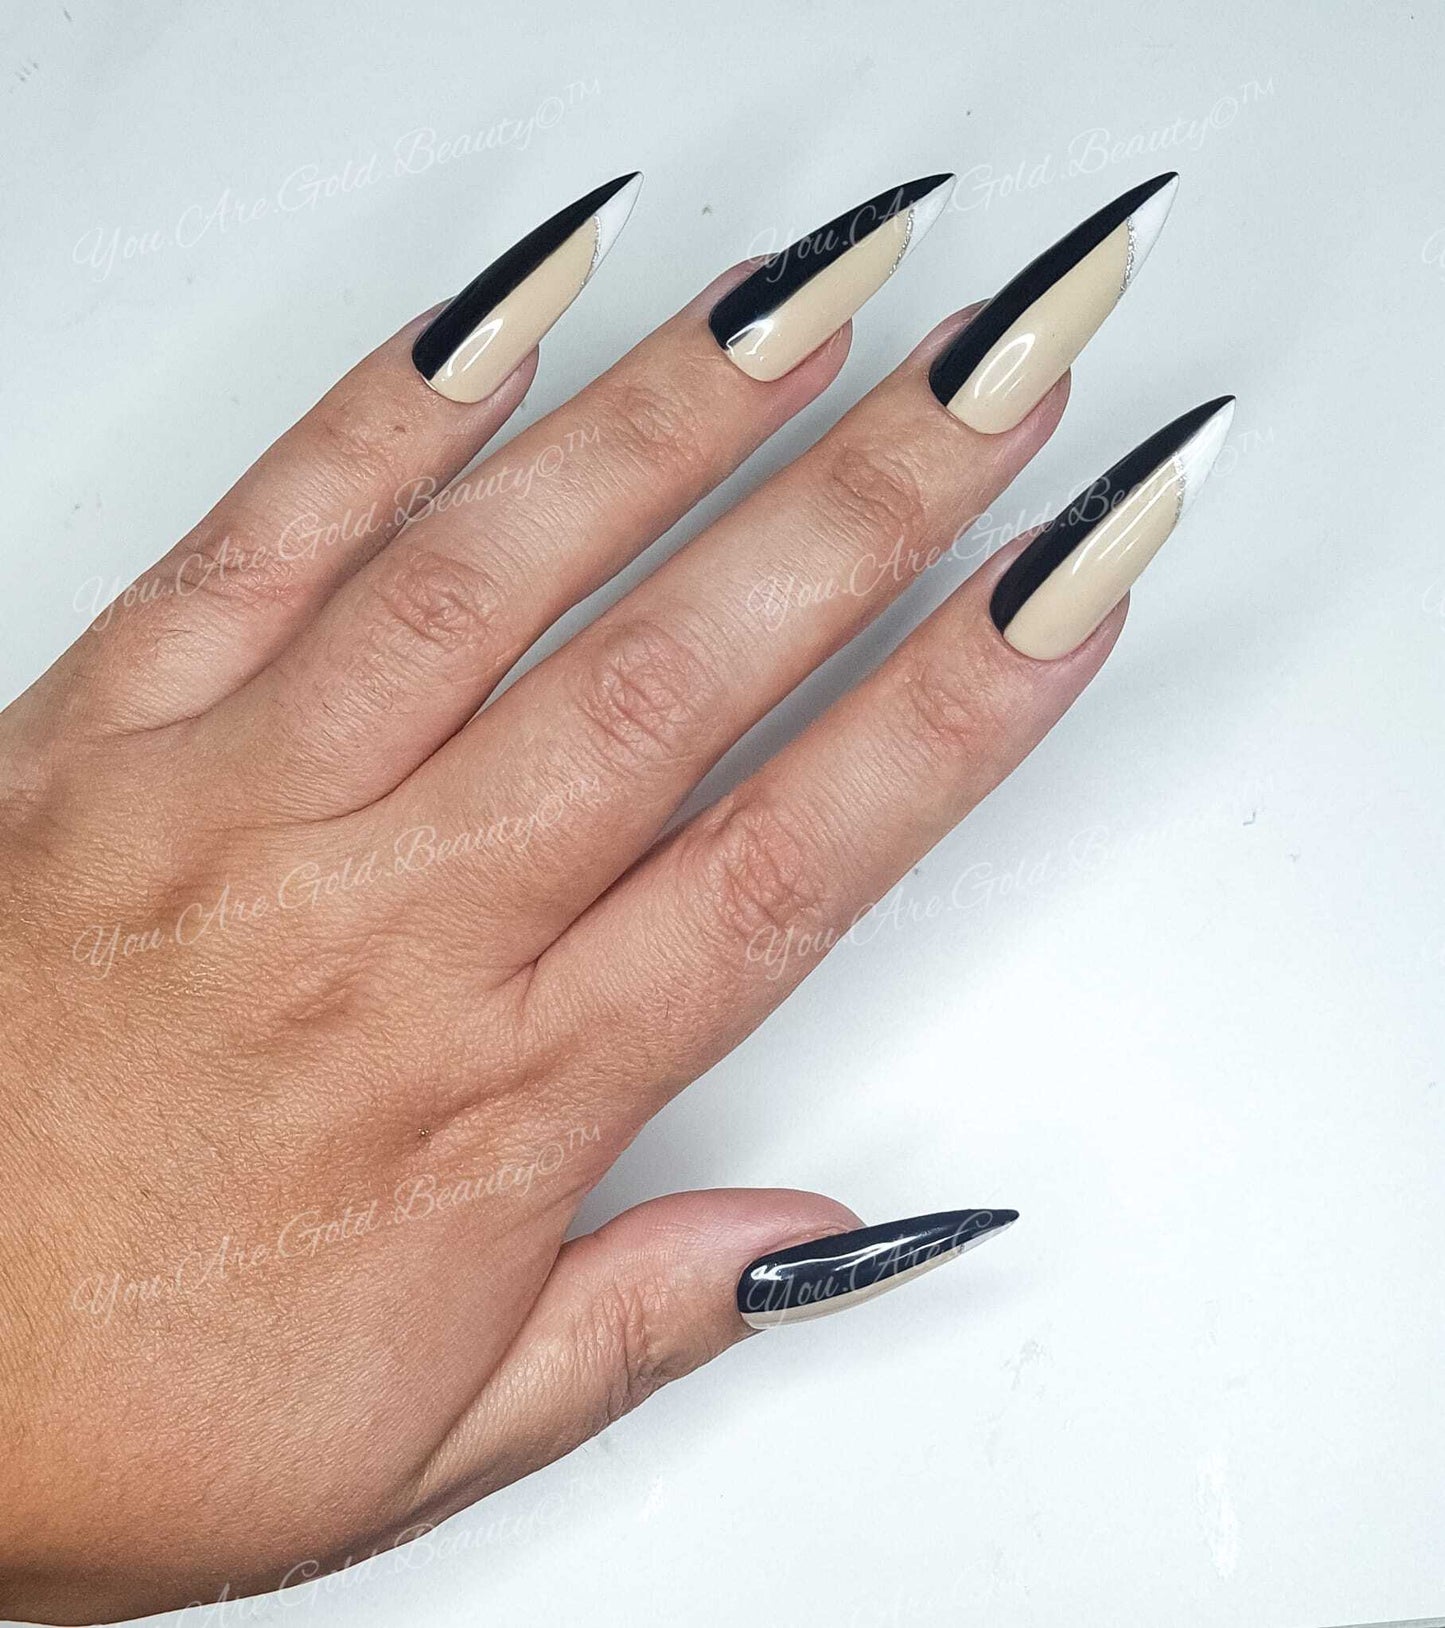 CoCo Press On Nails- Stiletto Shaped Black and white Classic half and half detail spring summer collection sexy classy full cover gel tip luxury false nails salon quality hand painted custom made uk COCO half white half black nail designs press on nails uk stiletto shaped nails black and white nails